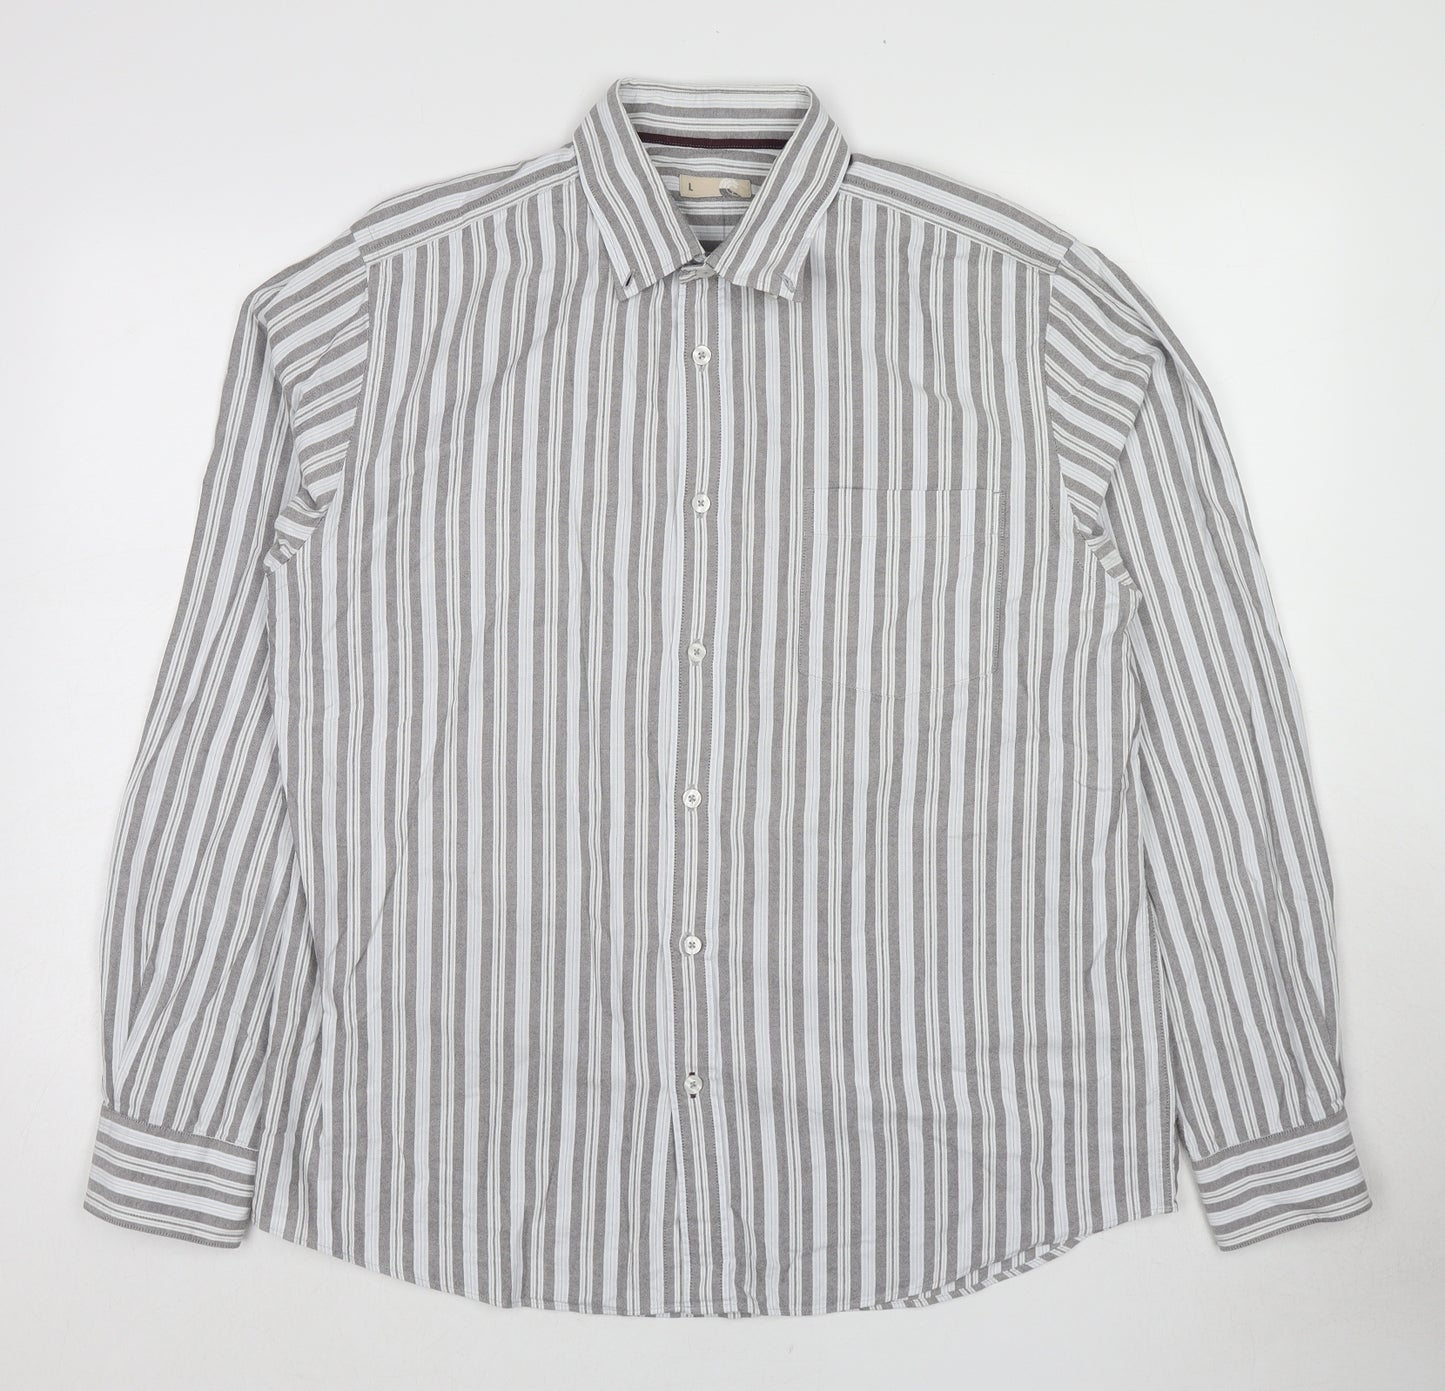 John Lewis Mens Grey Striped Cotton Button-Up Size L Collared Button